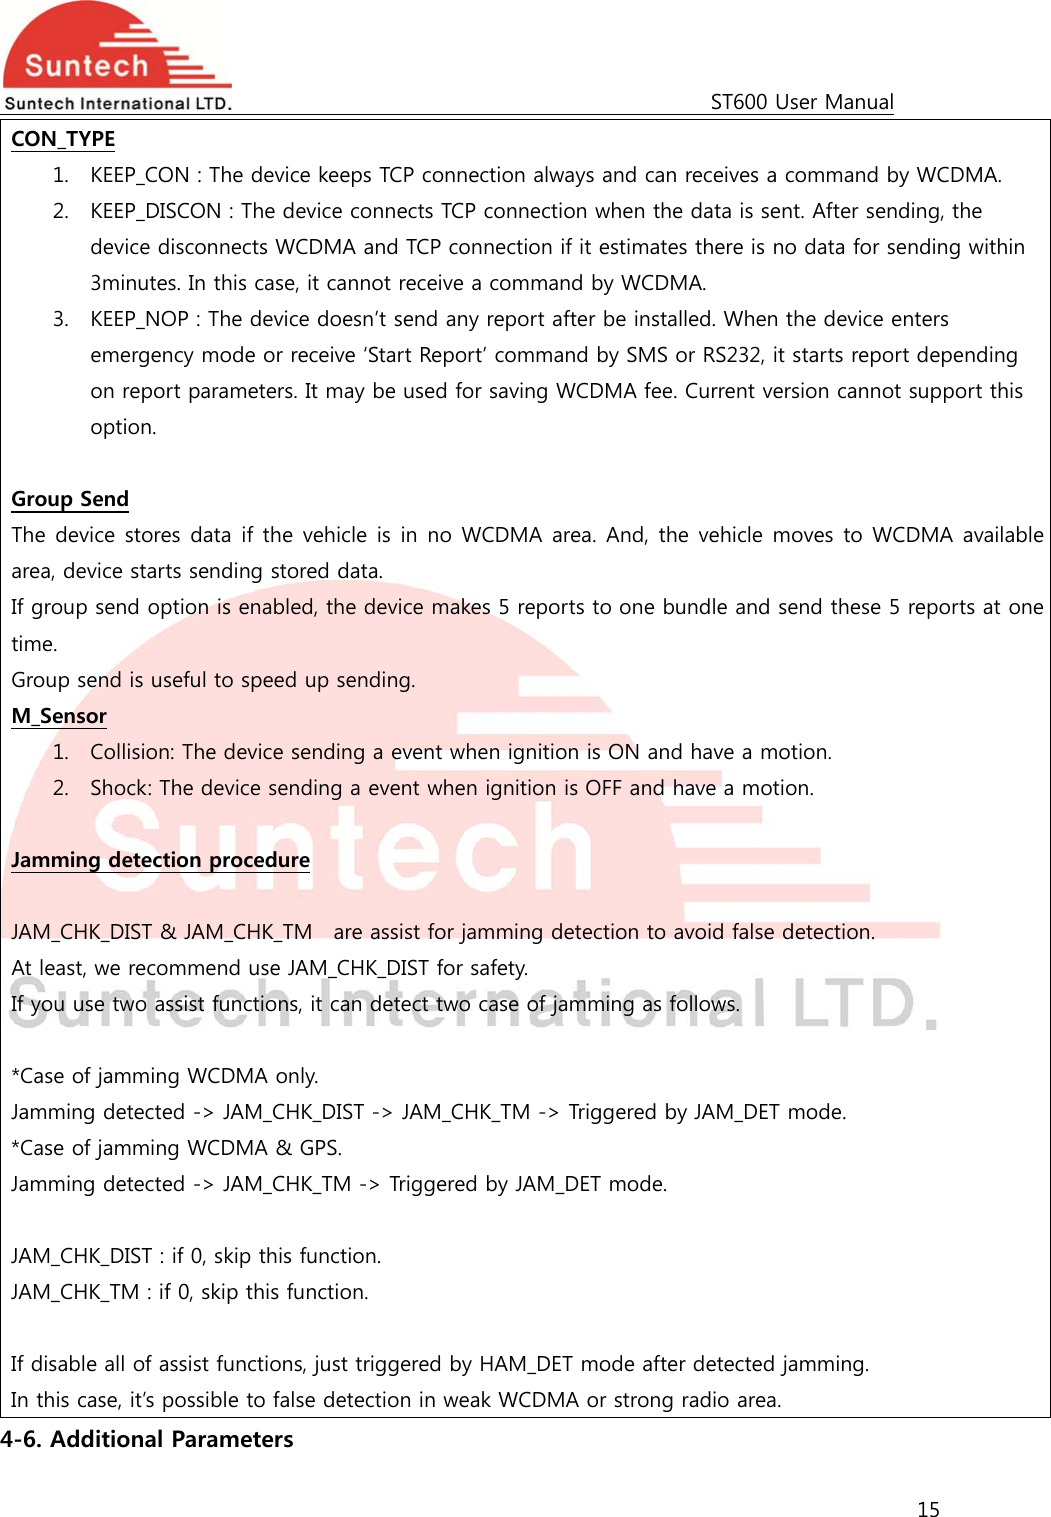                                                                                             ST600 User Manual 15  CON_TYPE 1. KEEP_CON : The device keeps TCP connection always and can receives a command by WCDMA. 2. KEEP_DISCON : The device connects TCP connection when the data is sent. After sending, the device disconnects WCDMA and TCP connection if it estimates there is no data for sending within 3minutes. In this case, it cannot receive a command by WCDMA. 3. KEEP_NOP : The device doesn’t send any report after be installed. When the device enters emergency mode or receive ‘Start Report’ command by SMS or RS232, it starts report depending on report parameters. It may be used for saving WCDMA fee. Current version cannot support this option.  Group Send The device stores data if the vehicle is in no WCDMA area. And, the vehicle moves to WCDMA availablearea, device starts sending stored data.   If group send option is enabled, the device makes 5 reports to one bundle and send these 5 reports at one time. Group send is useful to speed up sending. M_Sensor 1. Collision: The device sending a event when ignition is ON and have a motion.     2. Shock: The device sending a event when ignition is OFF and have a motion.      Jamming detection procedure  JAM_CHK_DIST &amp; JAM_CHK_TM    are assist for jamming detection to avoid false detection. At least, we recommend use JAM_CHK_DIST for safety. If you use two assist functions, it can detect two case of jamming as follows.  *Case of jamming WCDMA only. Jamming detected -&gt; JAM_CHK_DIST -&gt; JAM_CHK_TM -&gt; Triggered by JAM_DET mode. *Case of jamming WCDMA &amp; GPS. Jamming detected -&gt; JAM_CHK_TM -&gt; Triggered by JAM_DET mode.  JAM_CHK_DIST : if 0, skip this function. JAM_CHK_TM : if 0, skip this function.    If disable all of assist functions, just triggered by HAM_DET mode after detected jamming. In this case, it’s possible to false detection in weak WCDMA or strong radio area.   4-6. Additional Parameters 